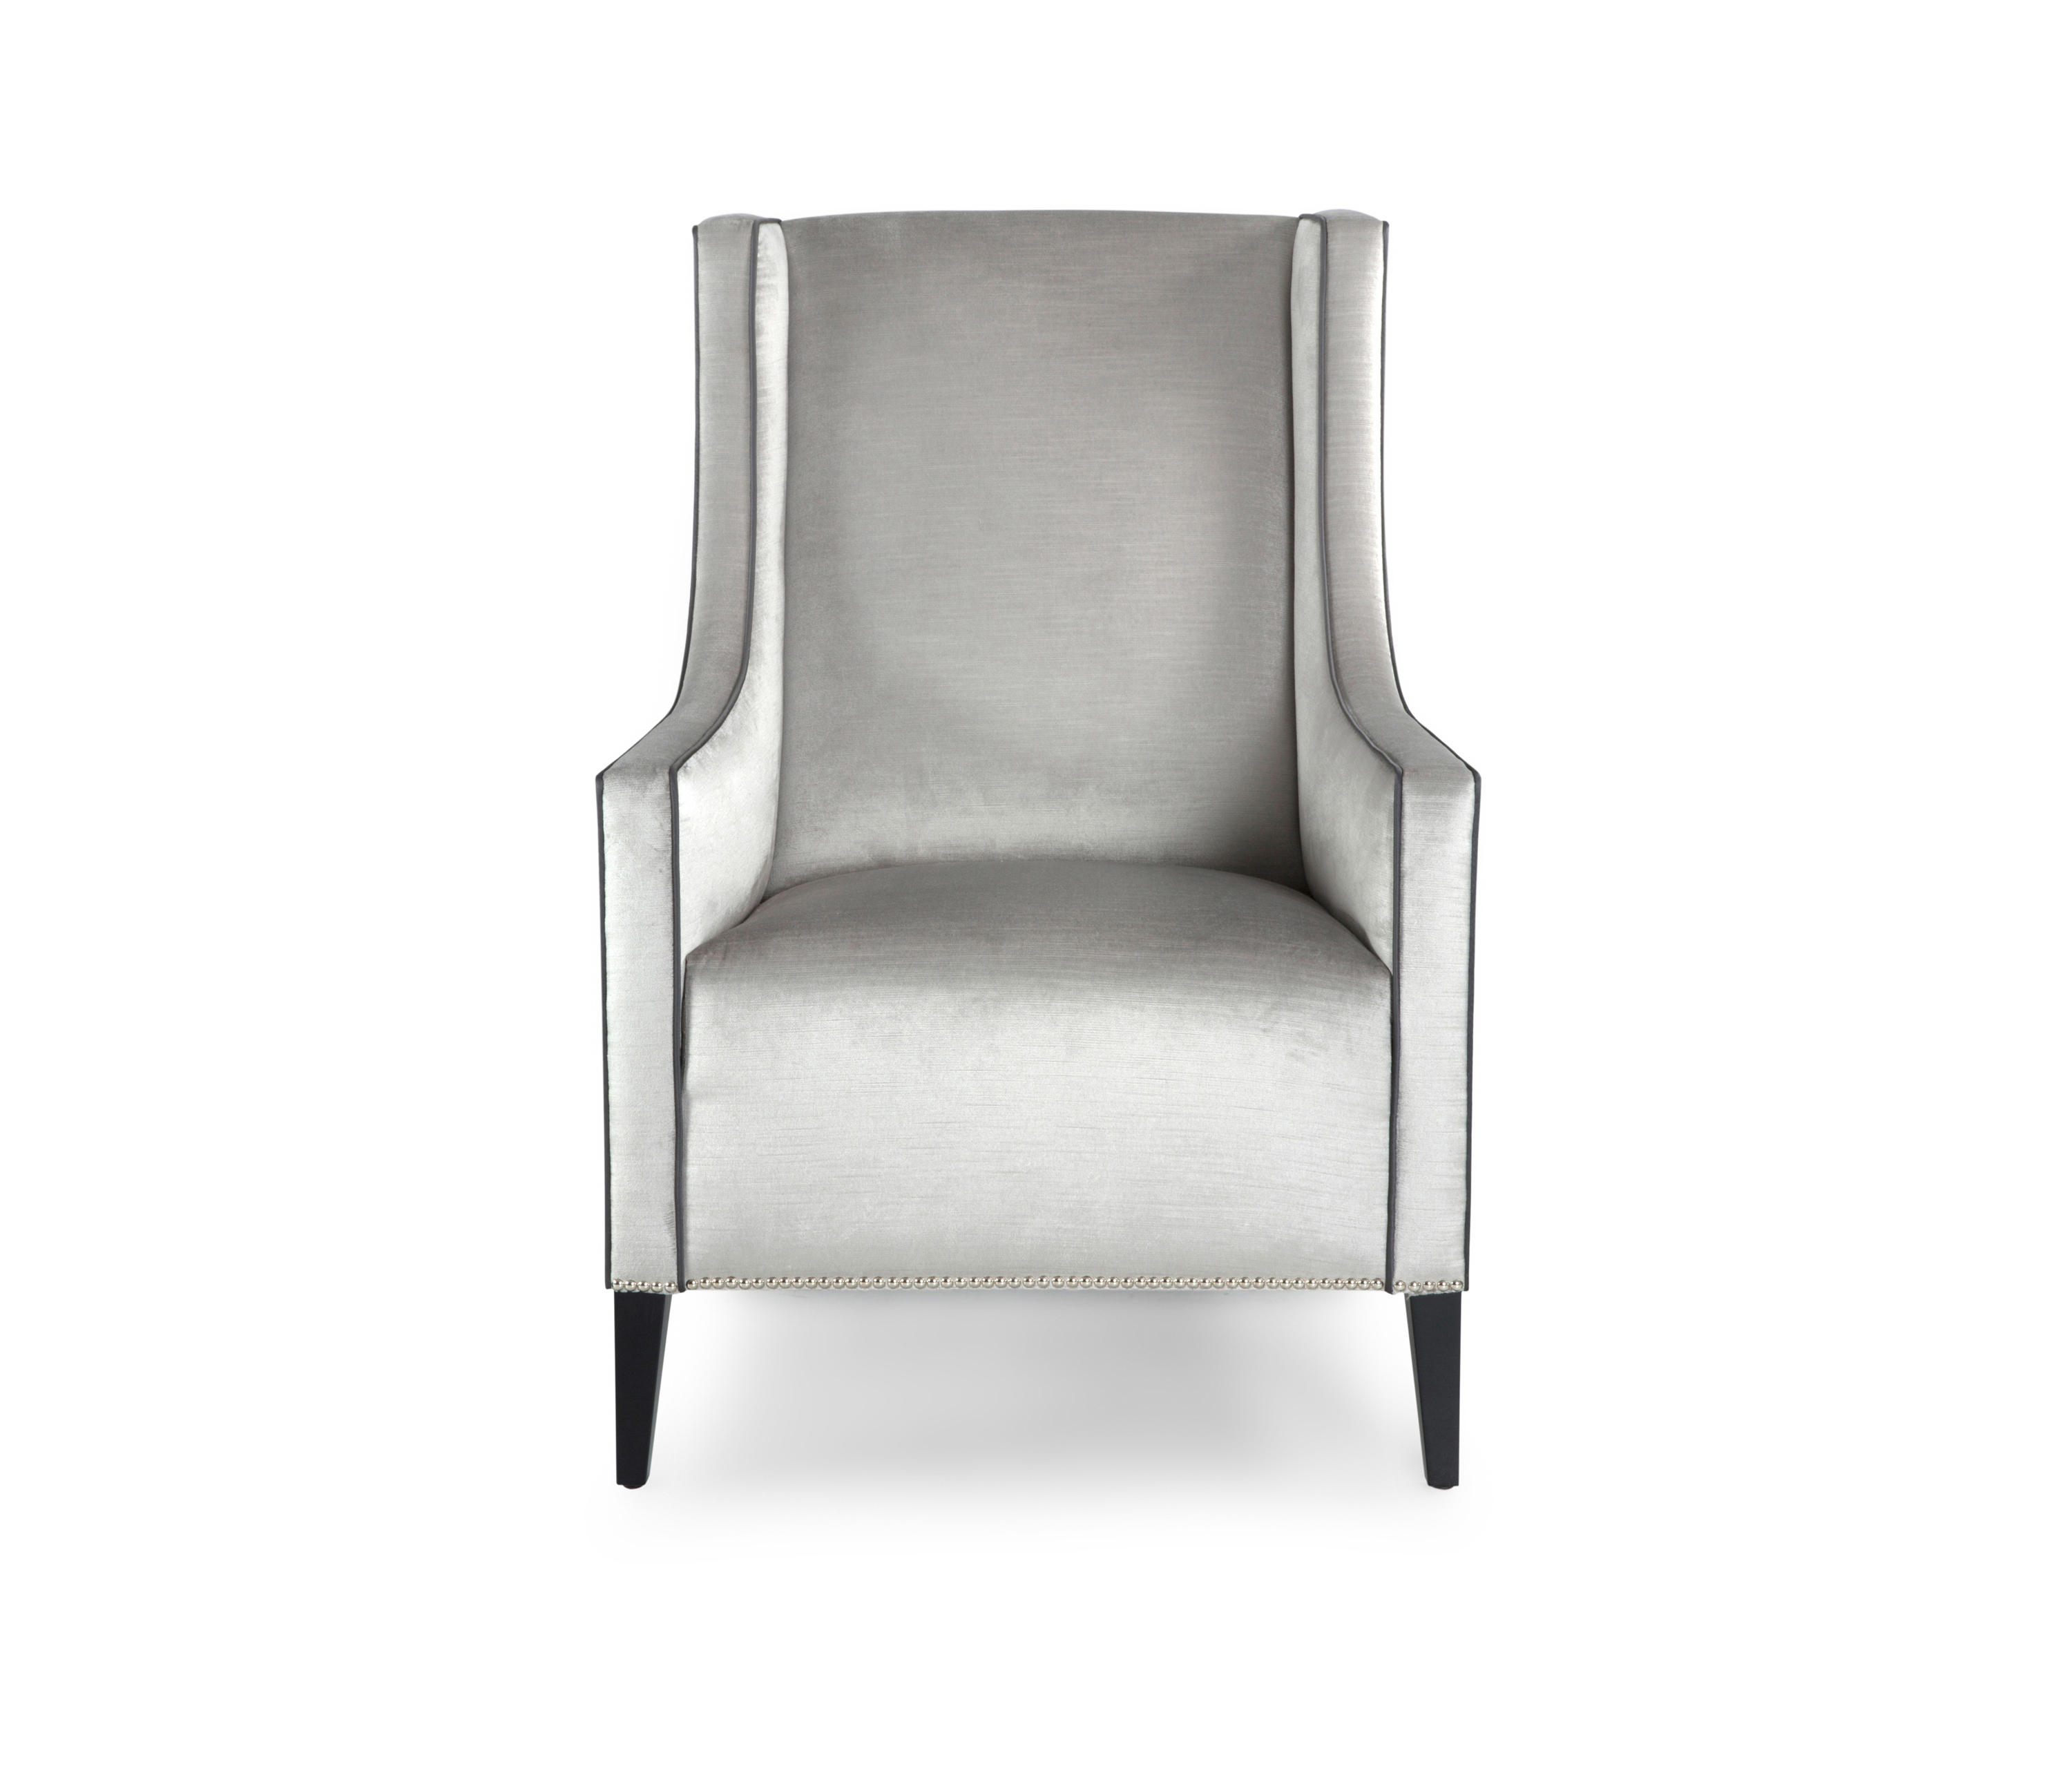 Christo Small Occasional Chair Architonic